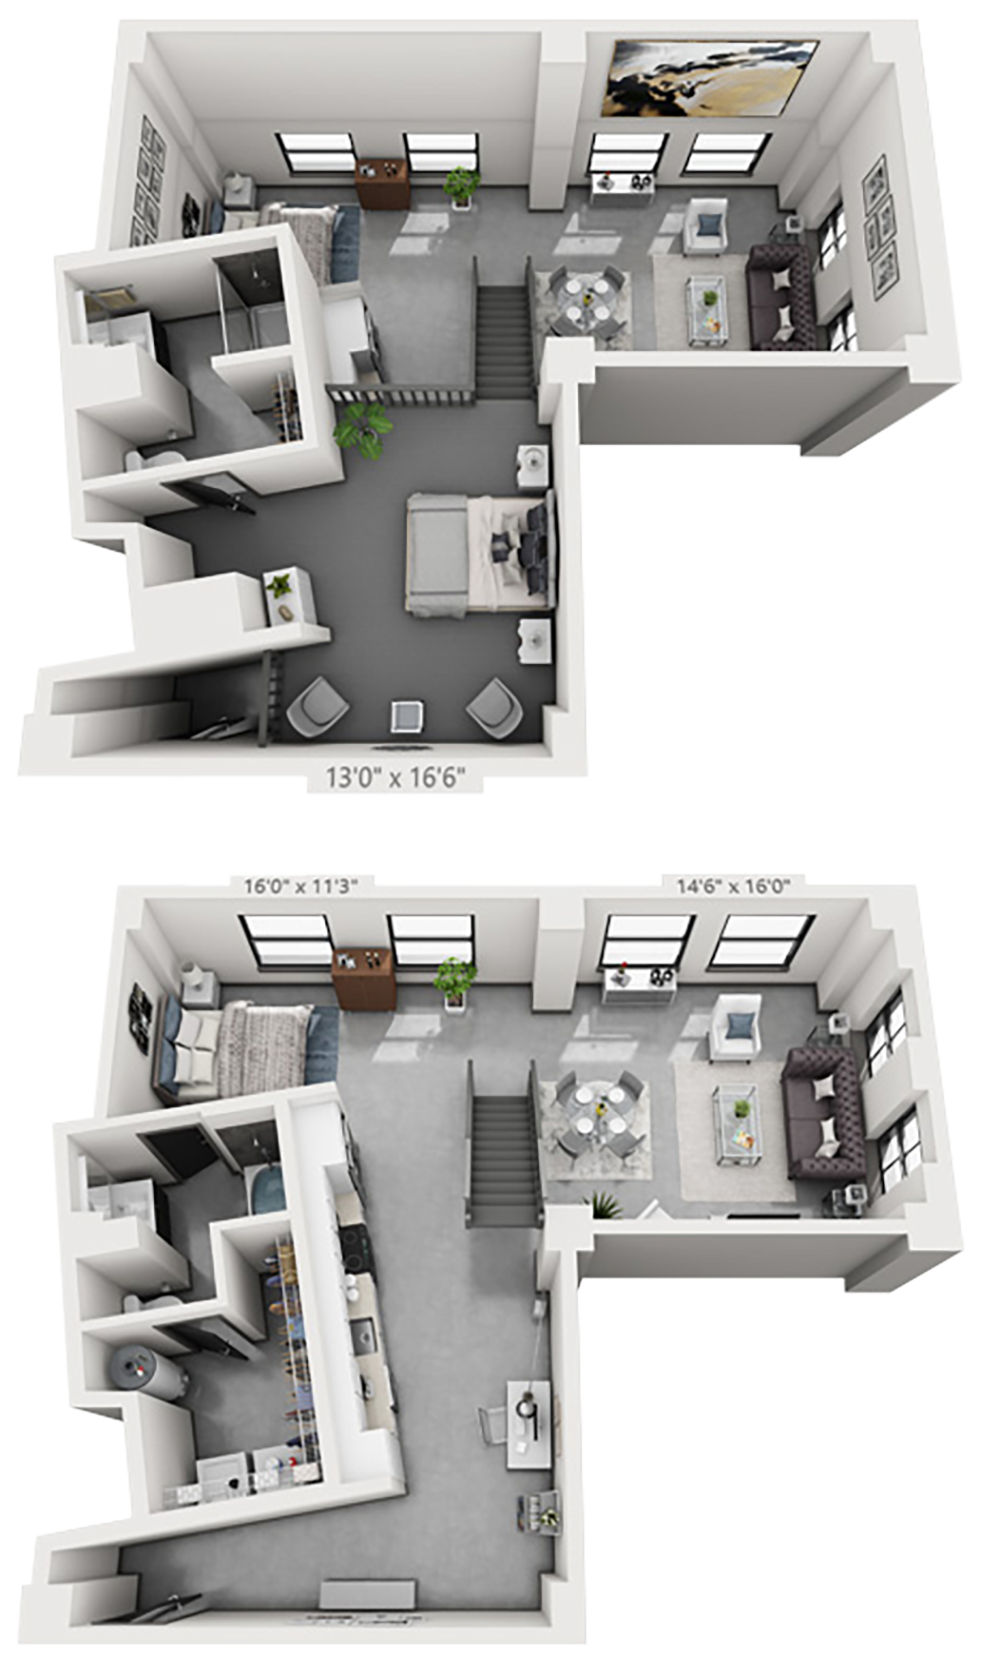 B6M plan is 2 bed, 2 bath and 1,290 square feet